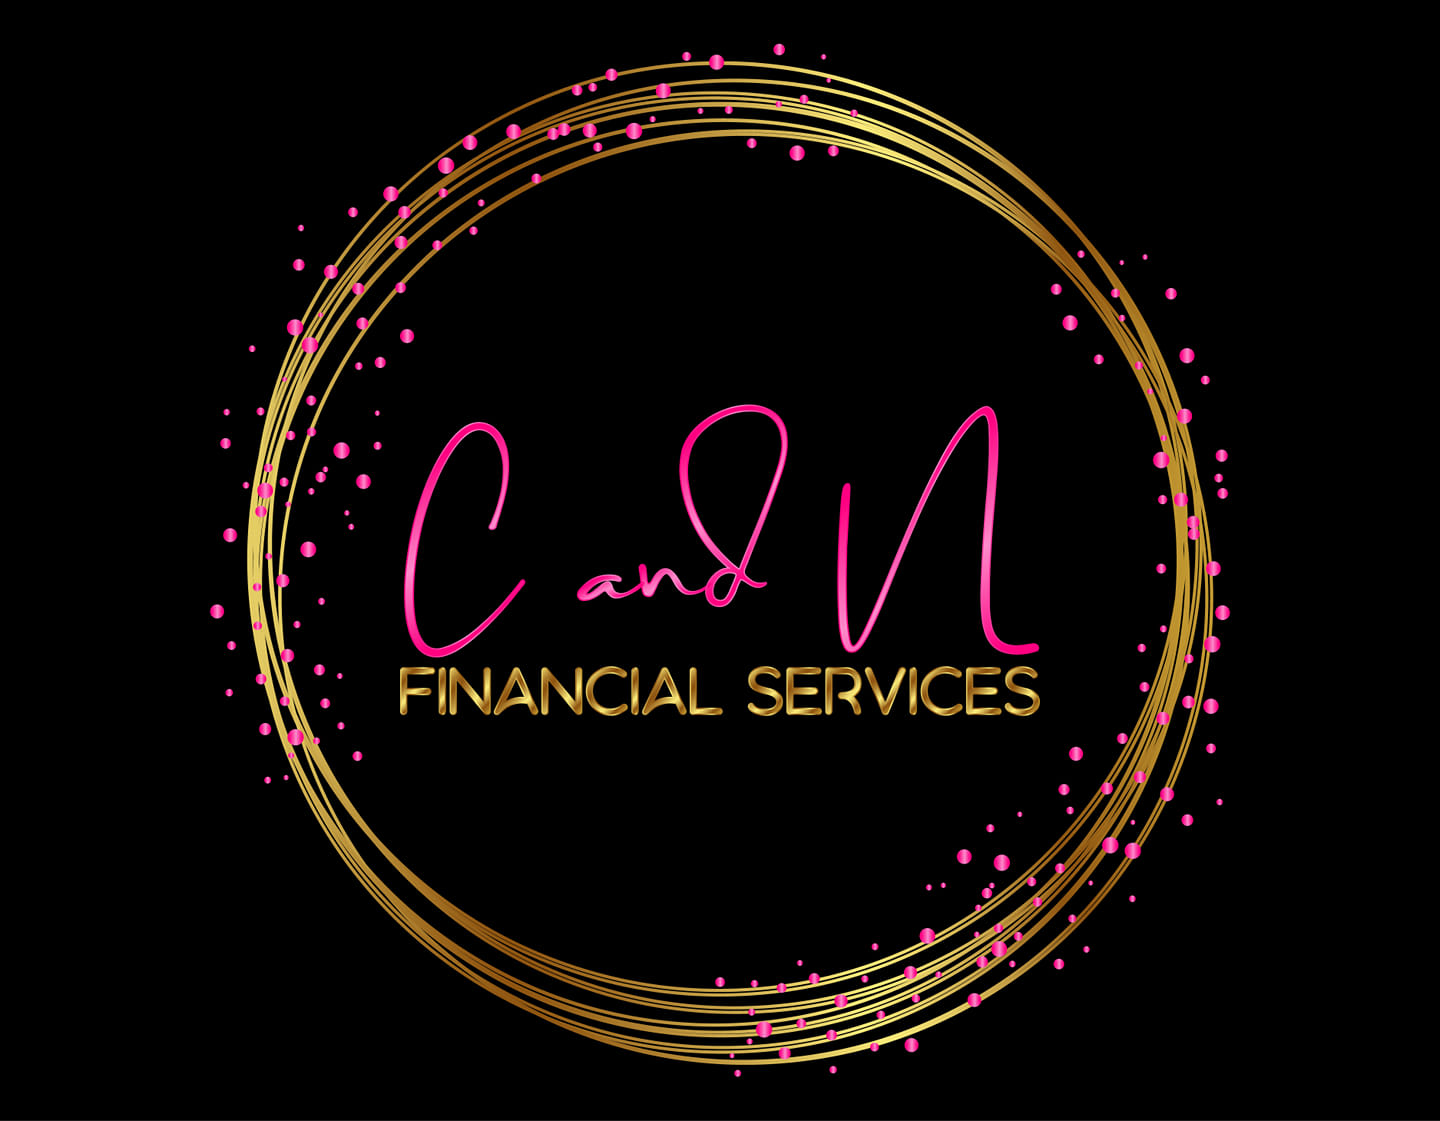 C and N Financial Services